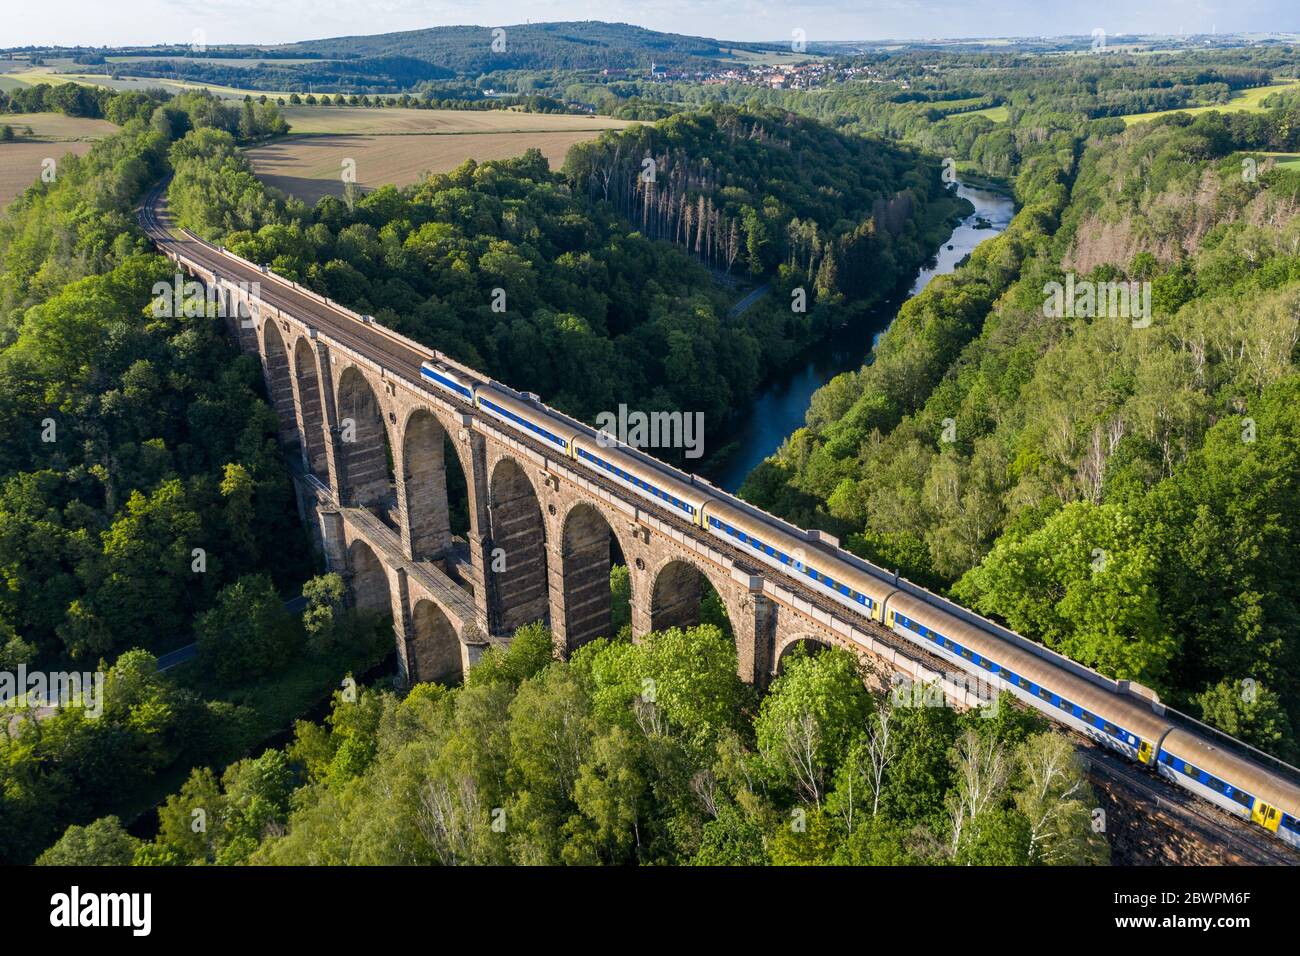 14 September 2017, Saxony, Göhren: A train of the Mitteldeutsche Regiobahn (MRB) crosses the Zwickauer Mulde on the Göhren viaduct. The railway bridge, originally 512 meters long and 68 meters high, is the third largest of these structures in Saxony. For years only regional trains have been running on the only slightly electrified line between Leipzig and Chemnitz. The planned expansion of the line will not begin until 2025 at the earliest. If conditions are favourable, the line could be double-tracked and electric power could be available three years later. (Aerial photograph with drone) Phot Stock Photo